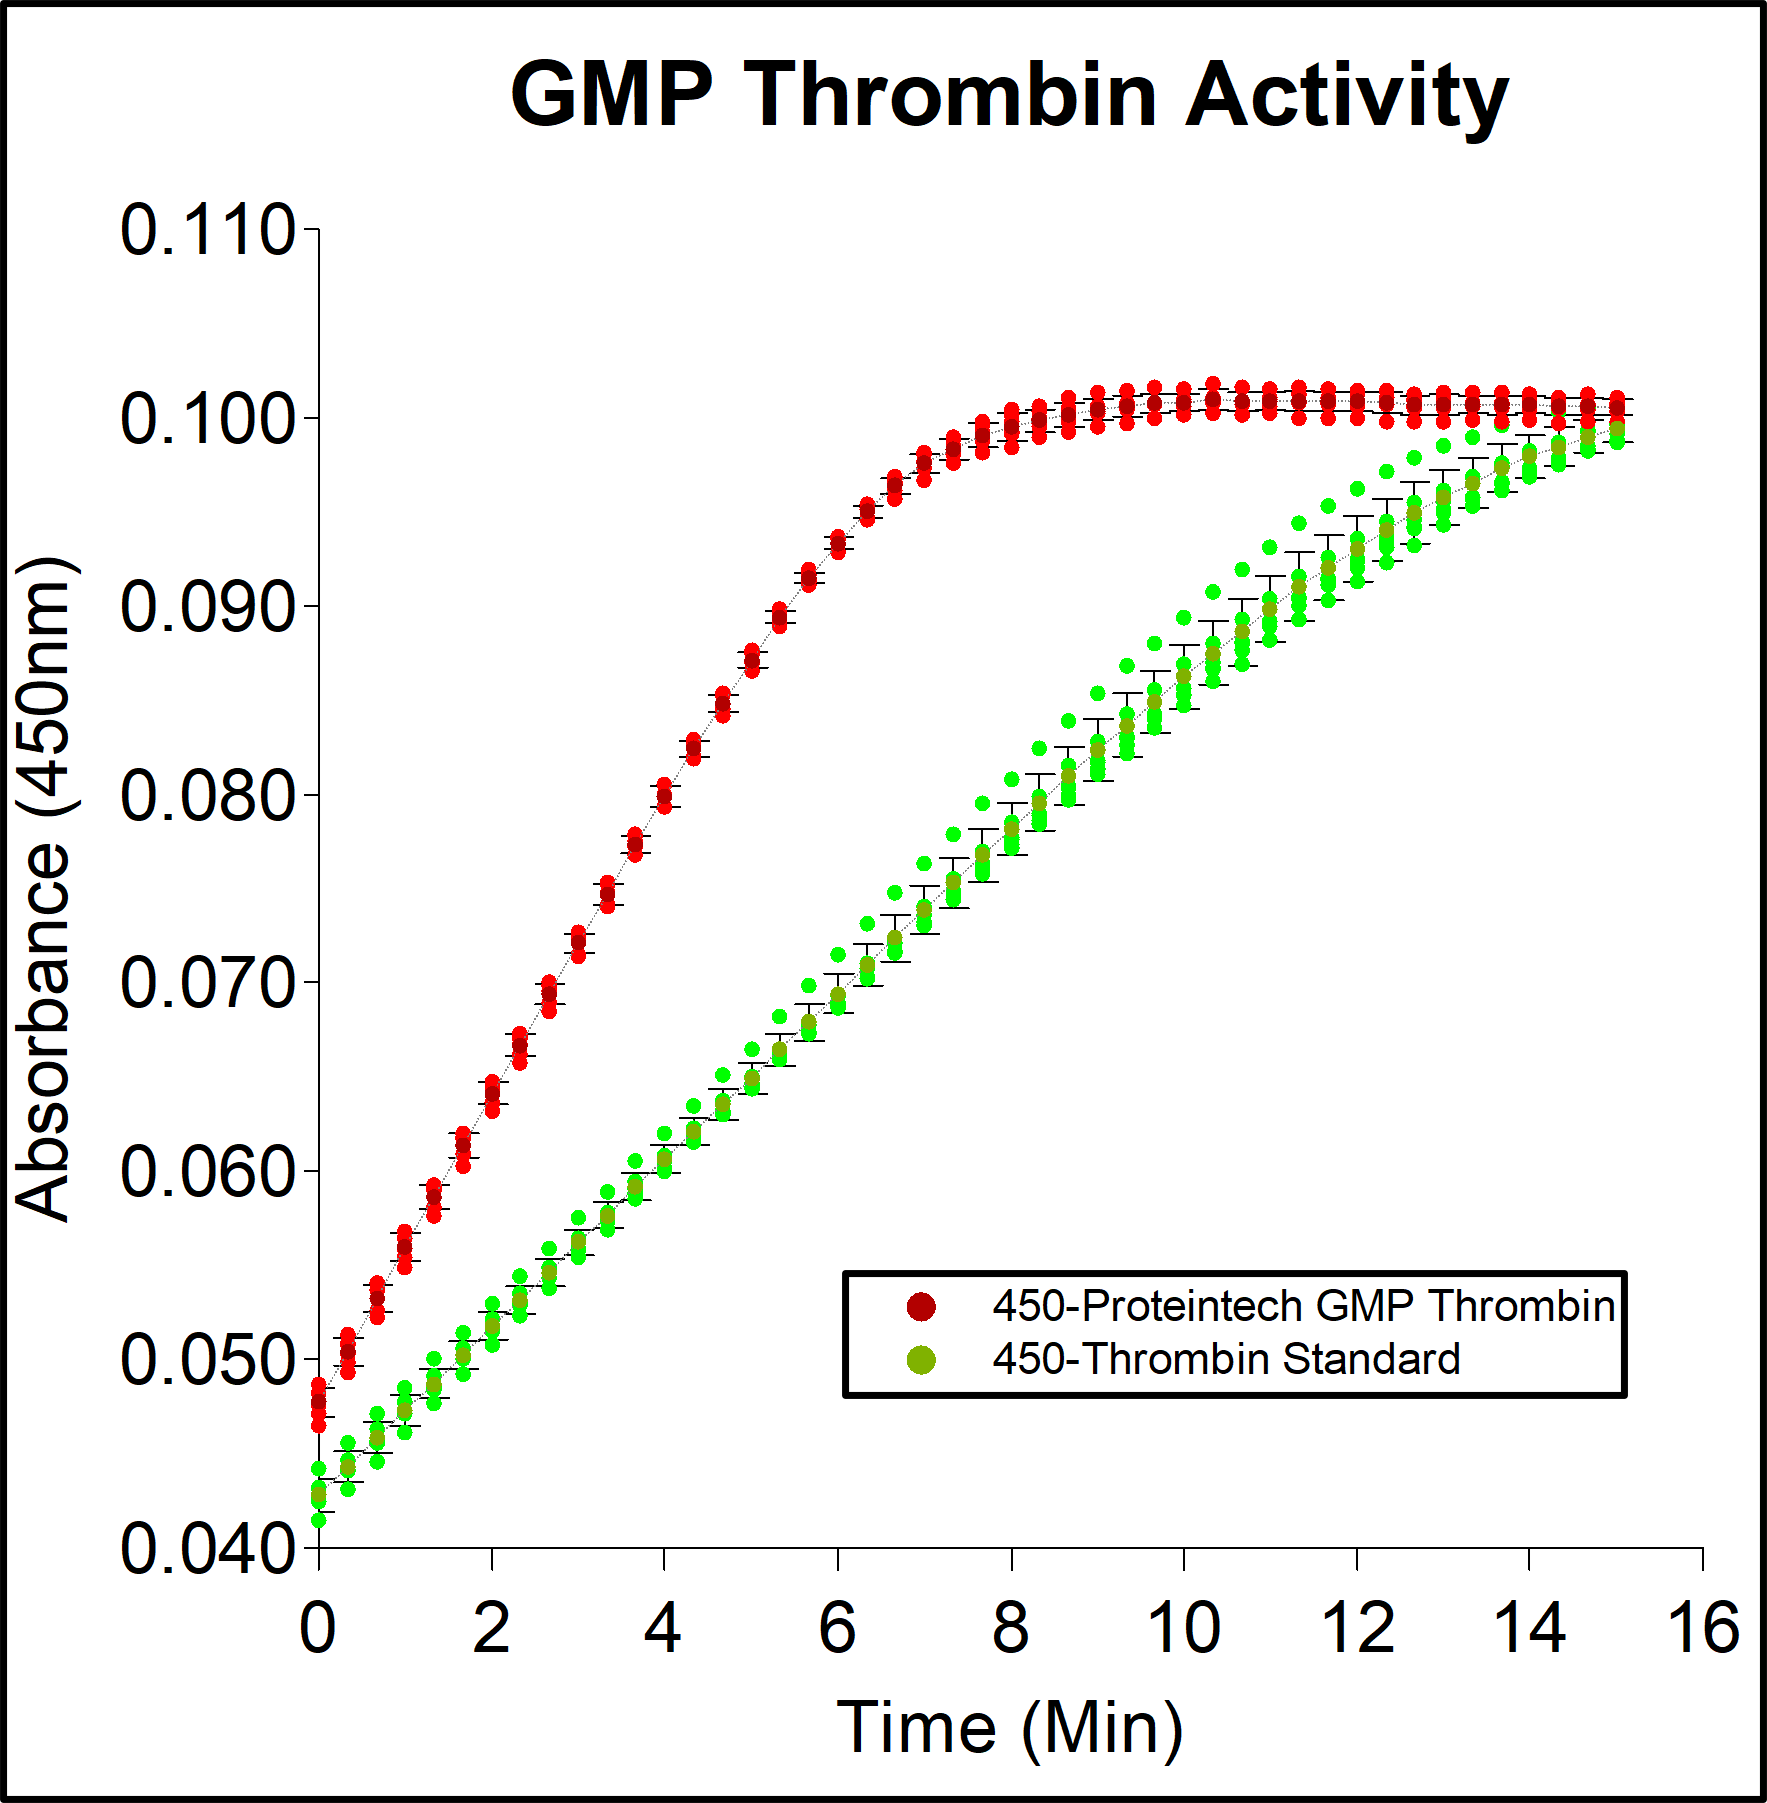 The activity of GMP thrombin (HZ-3010-GMP) was measured by the rate of free chromophore formation from Chromozym TH thrombin substrate monitored by absorbance at 405 nm. The enzymatic reaction was carried out in 50mM Tris-HCl pH 8.3 buffer containing 0.1% BSA and 227 mM NaCl at 25°C.  Activity was conducted in triplicate on a validated bioassay. Activity ranges from 1000-5000 units/mg.